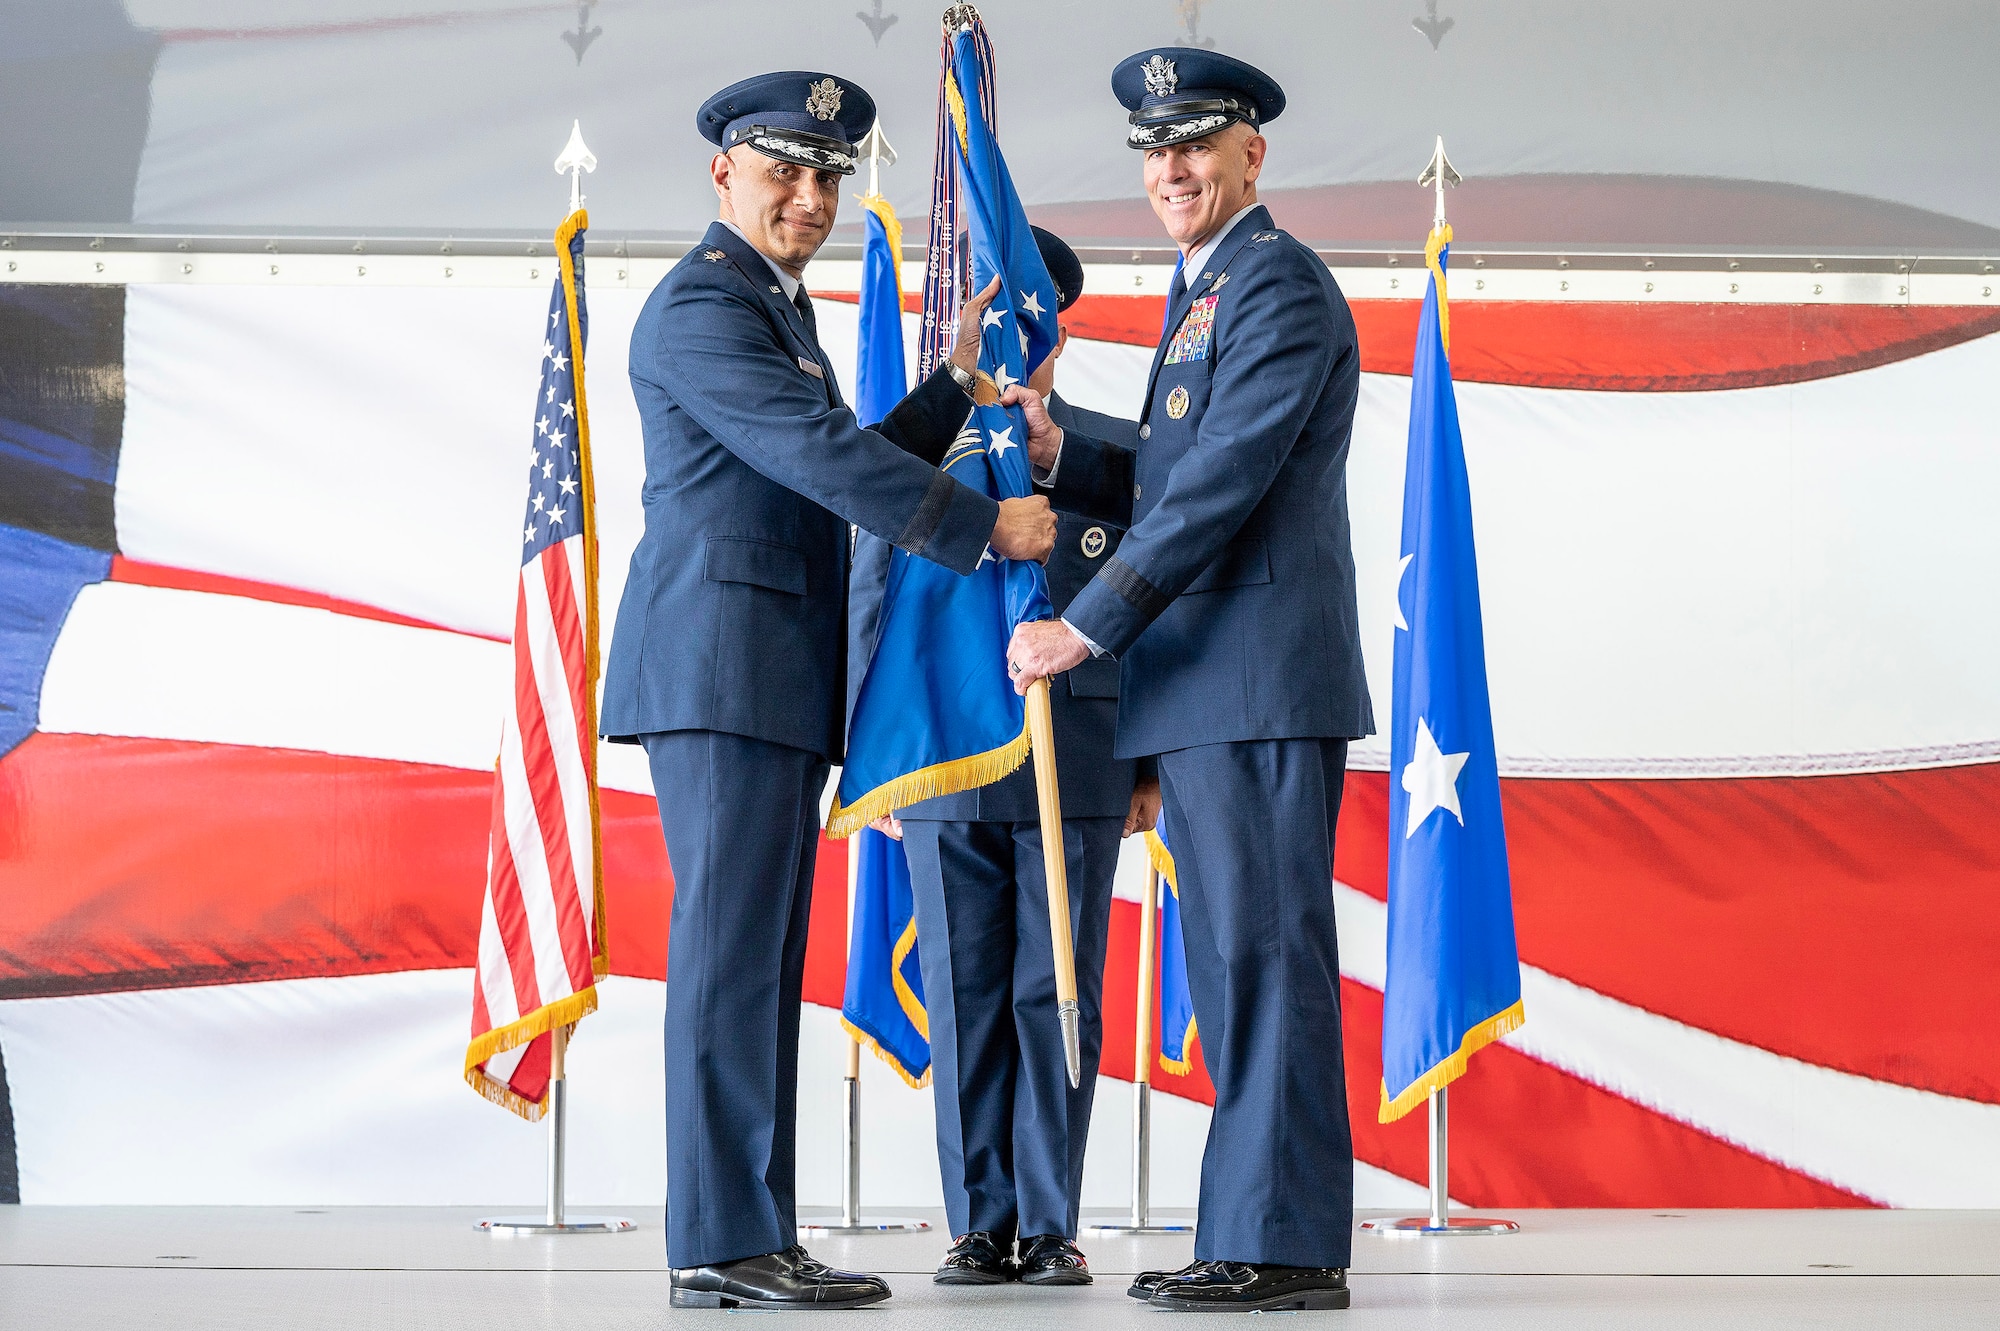 U.S. Air Force Maj. Gen. Clark Quinn, right, 19th AF commander, receives the unit guidon from Lt. Gen. Brian Robinson, left, commander of Air Education and Training Command, during the 19th AF assumption of command ceremony